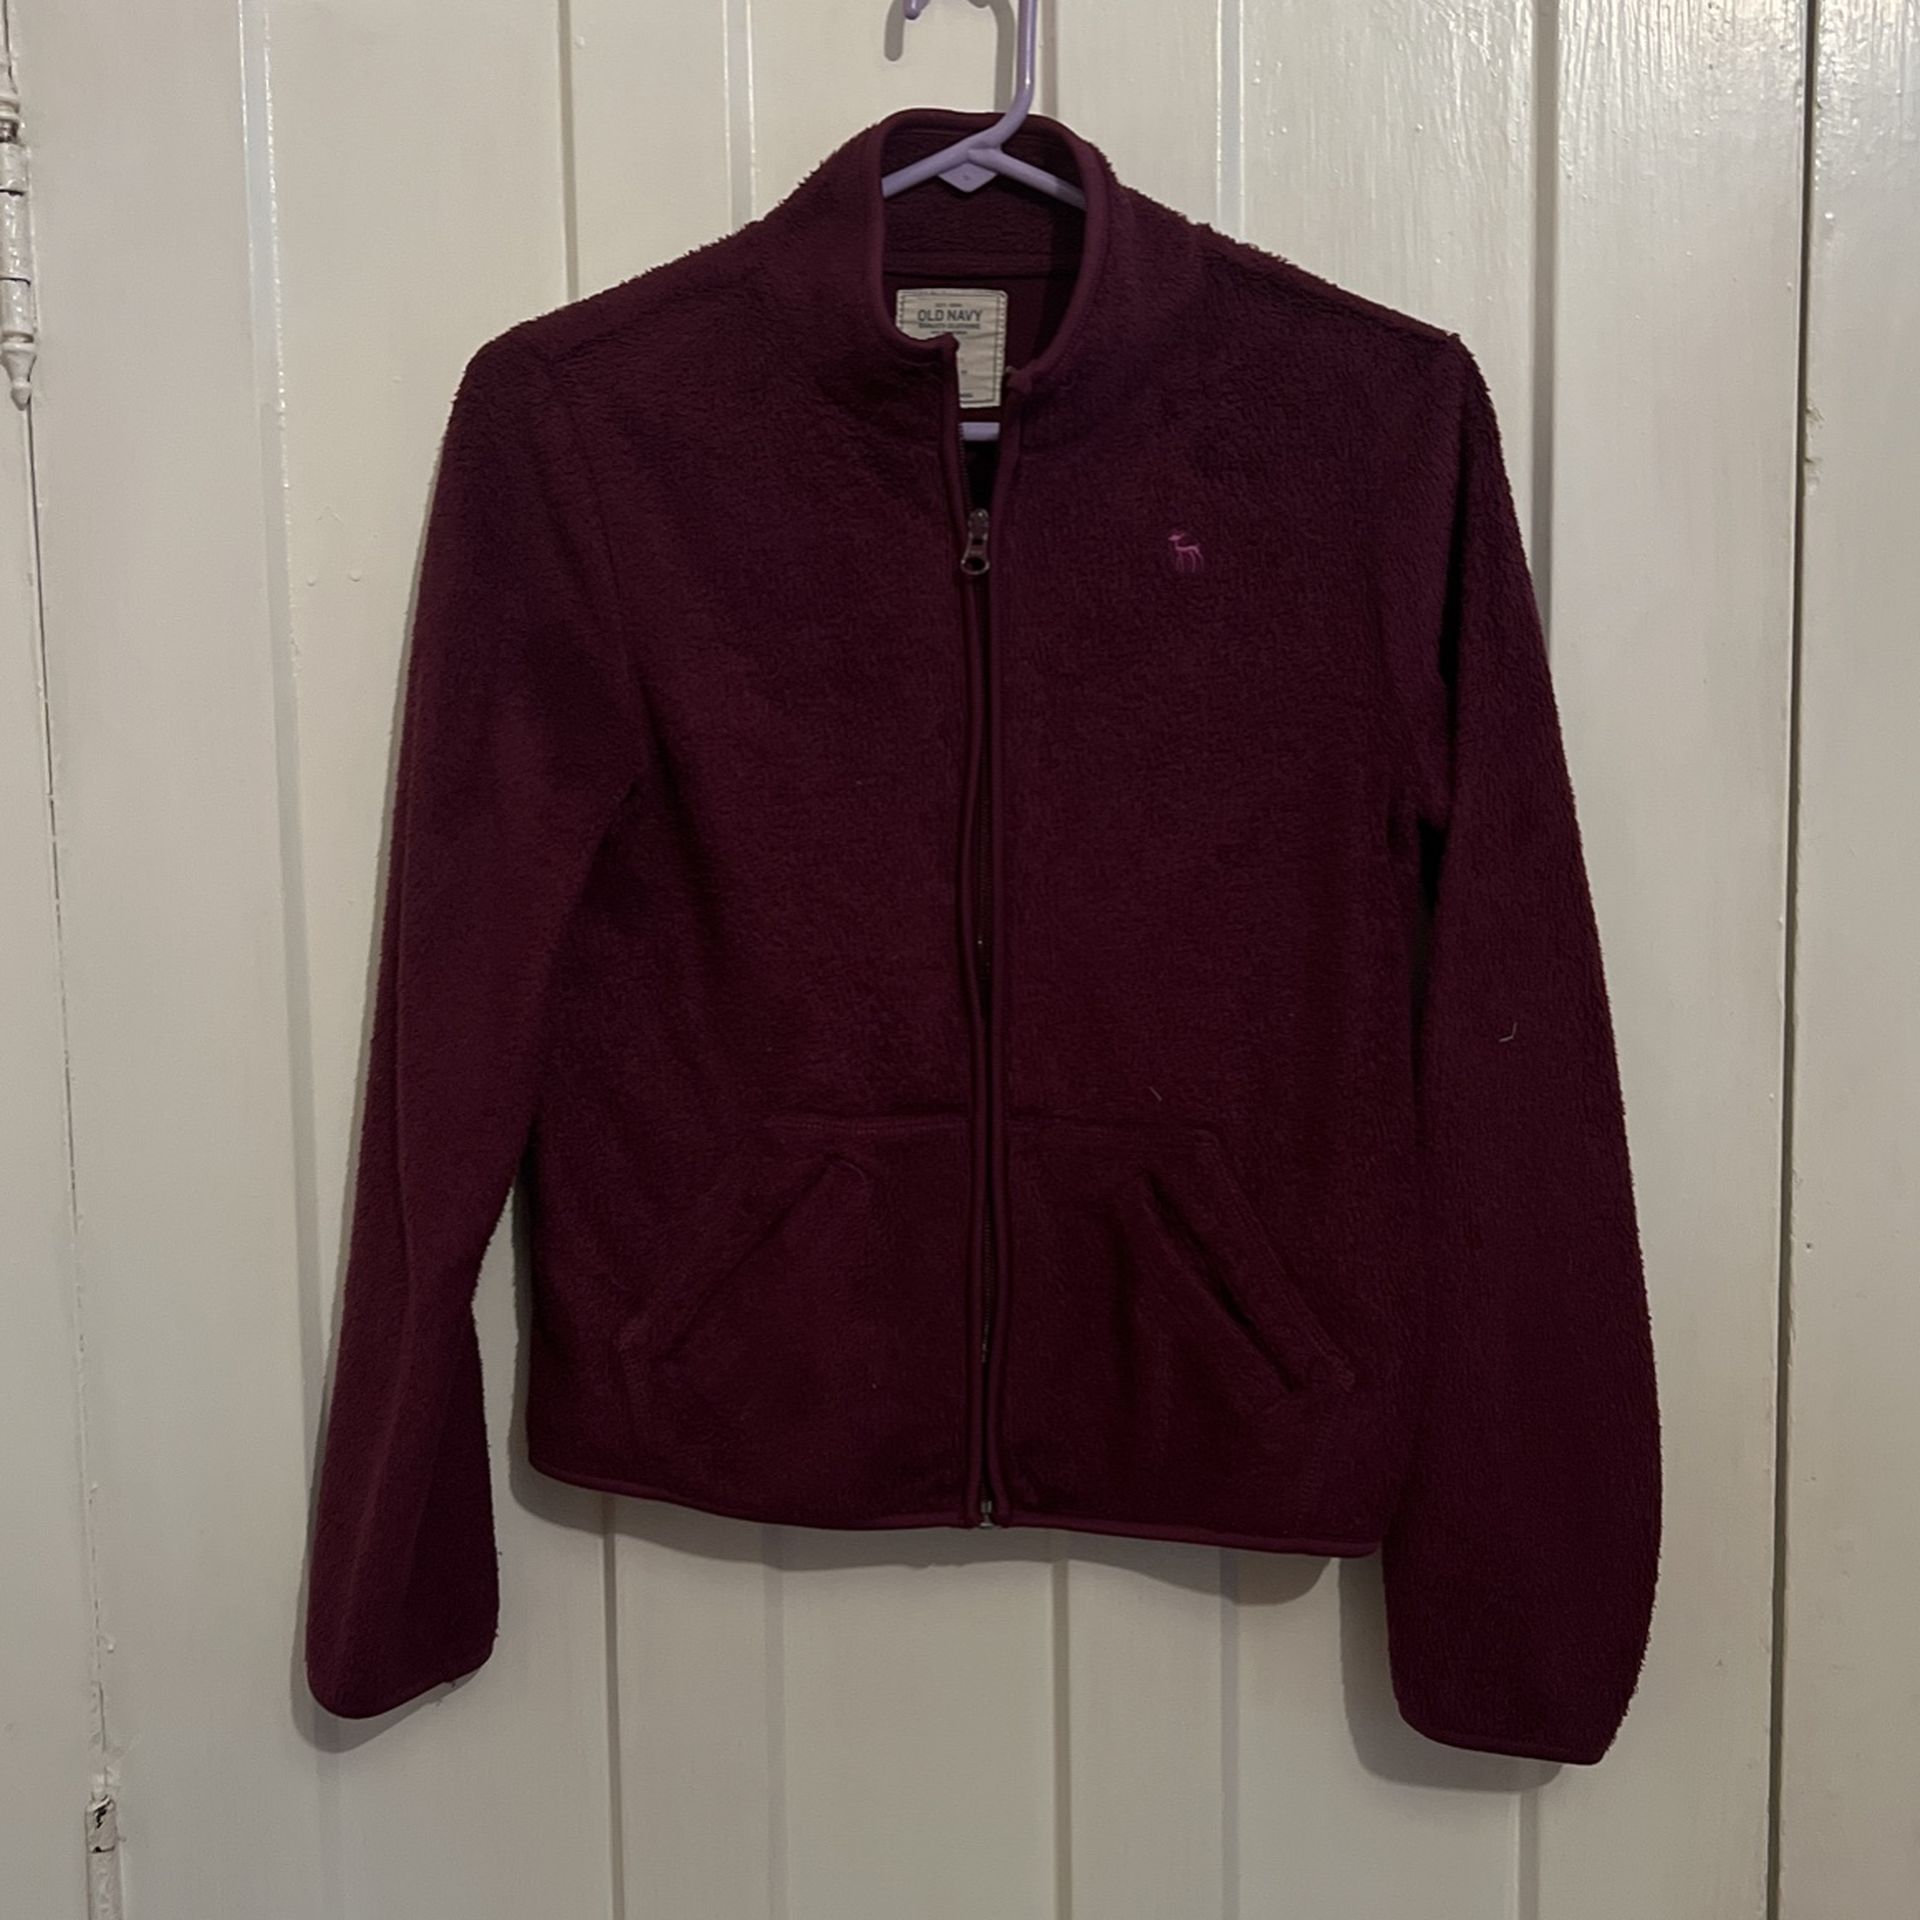 Girls Pullover Size Large 